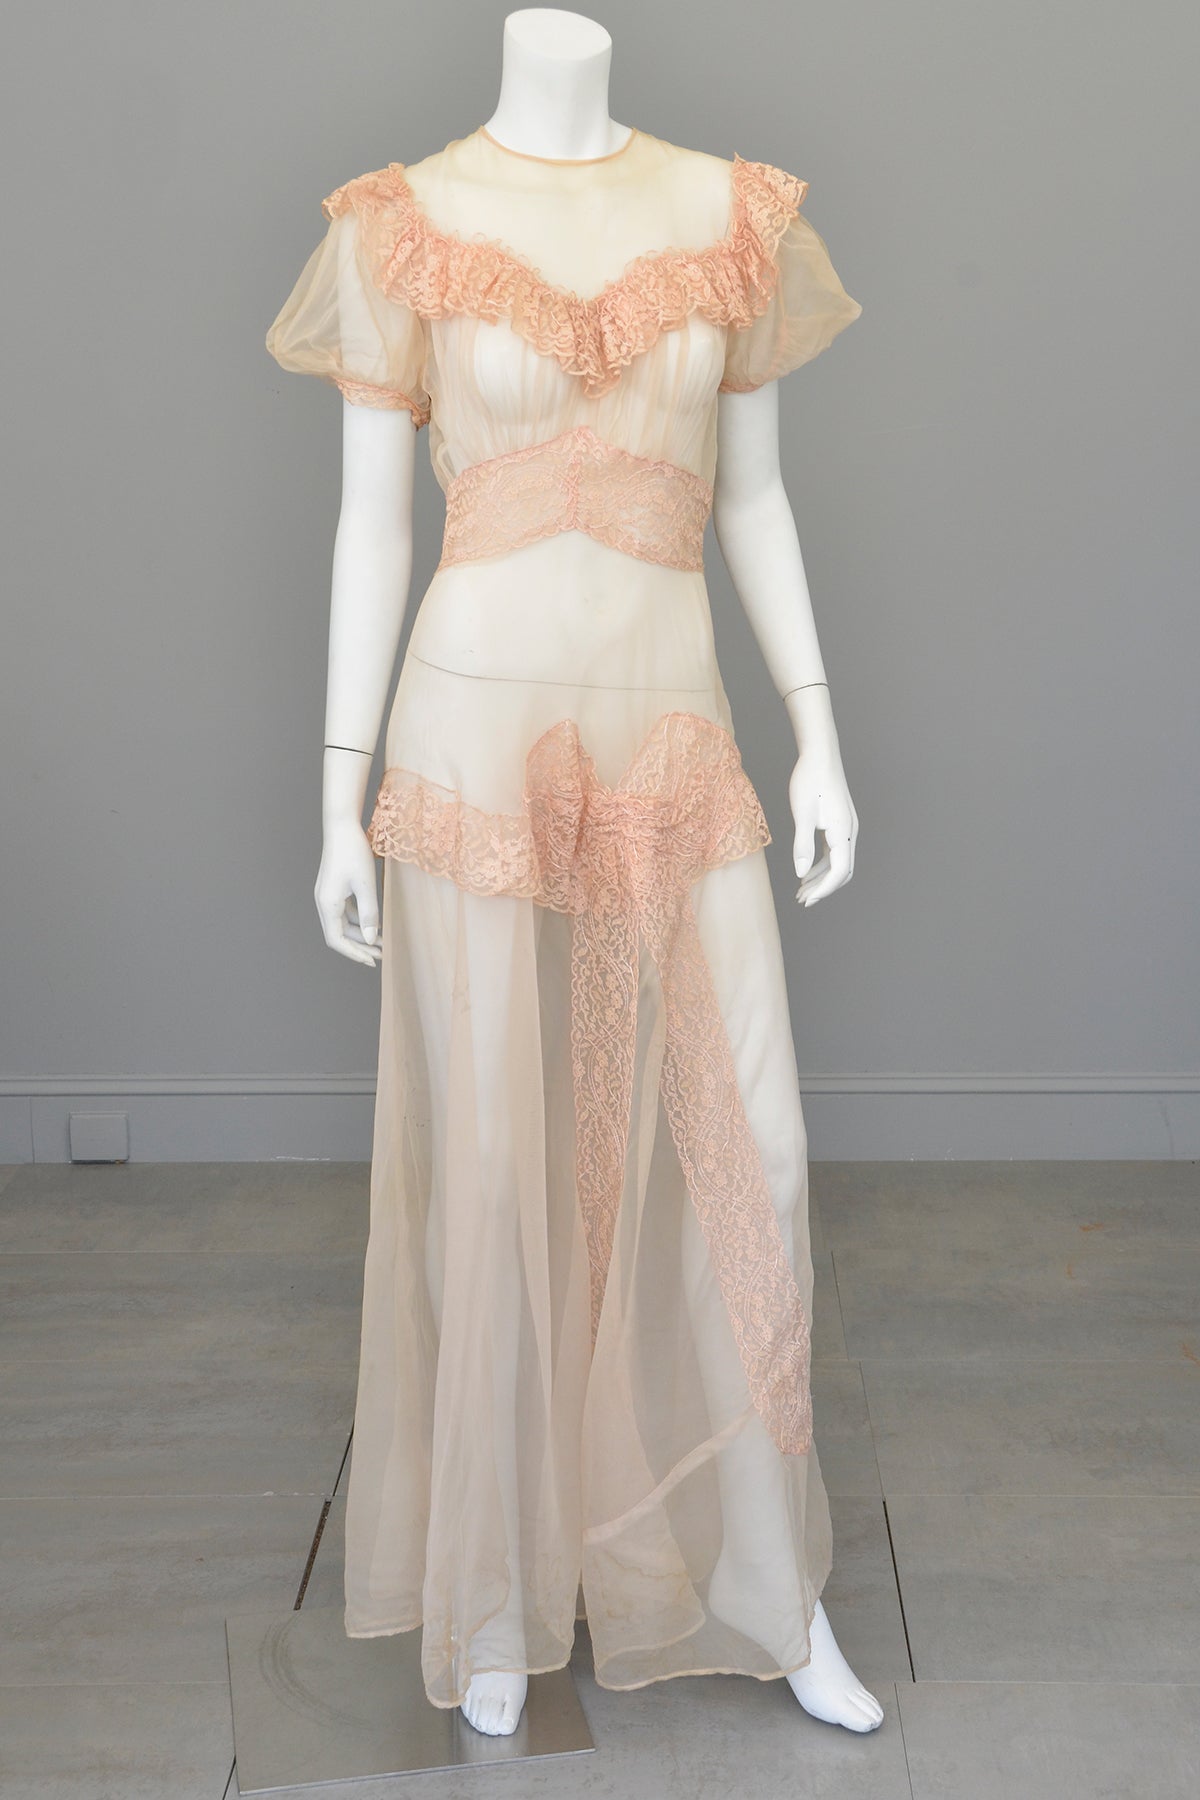 1930s Shell Pink Lace Ruffles Puff Sleeves Gown | Mesh Netting | Restoration or Study